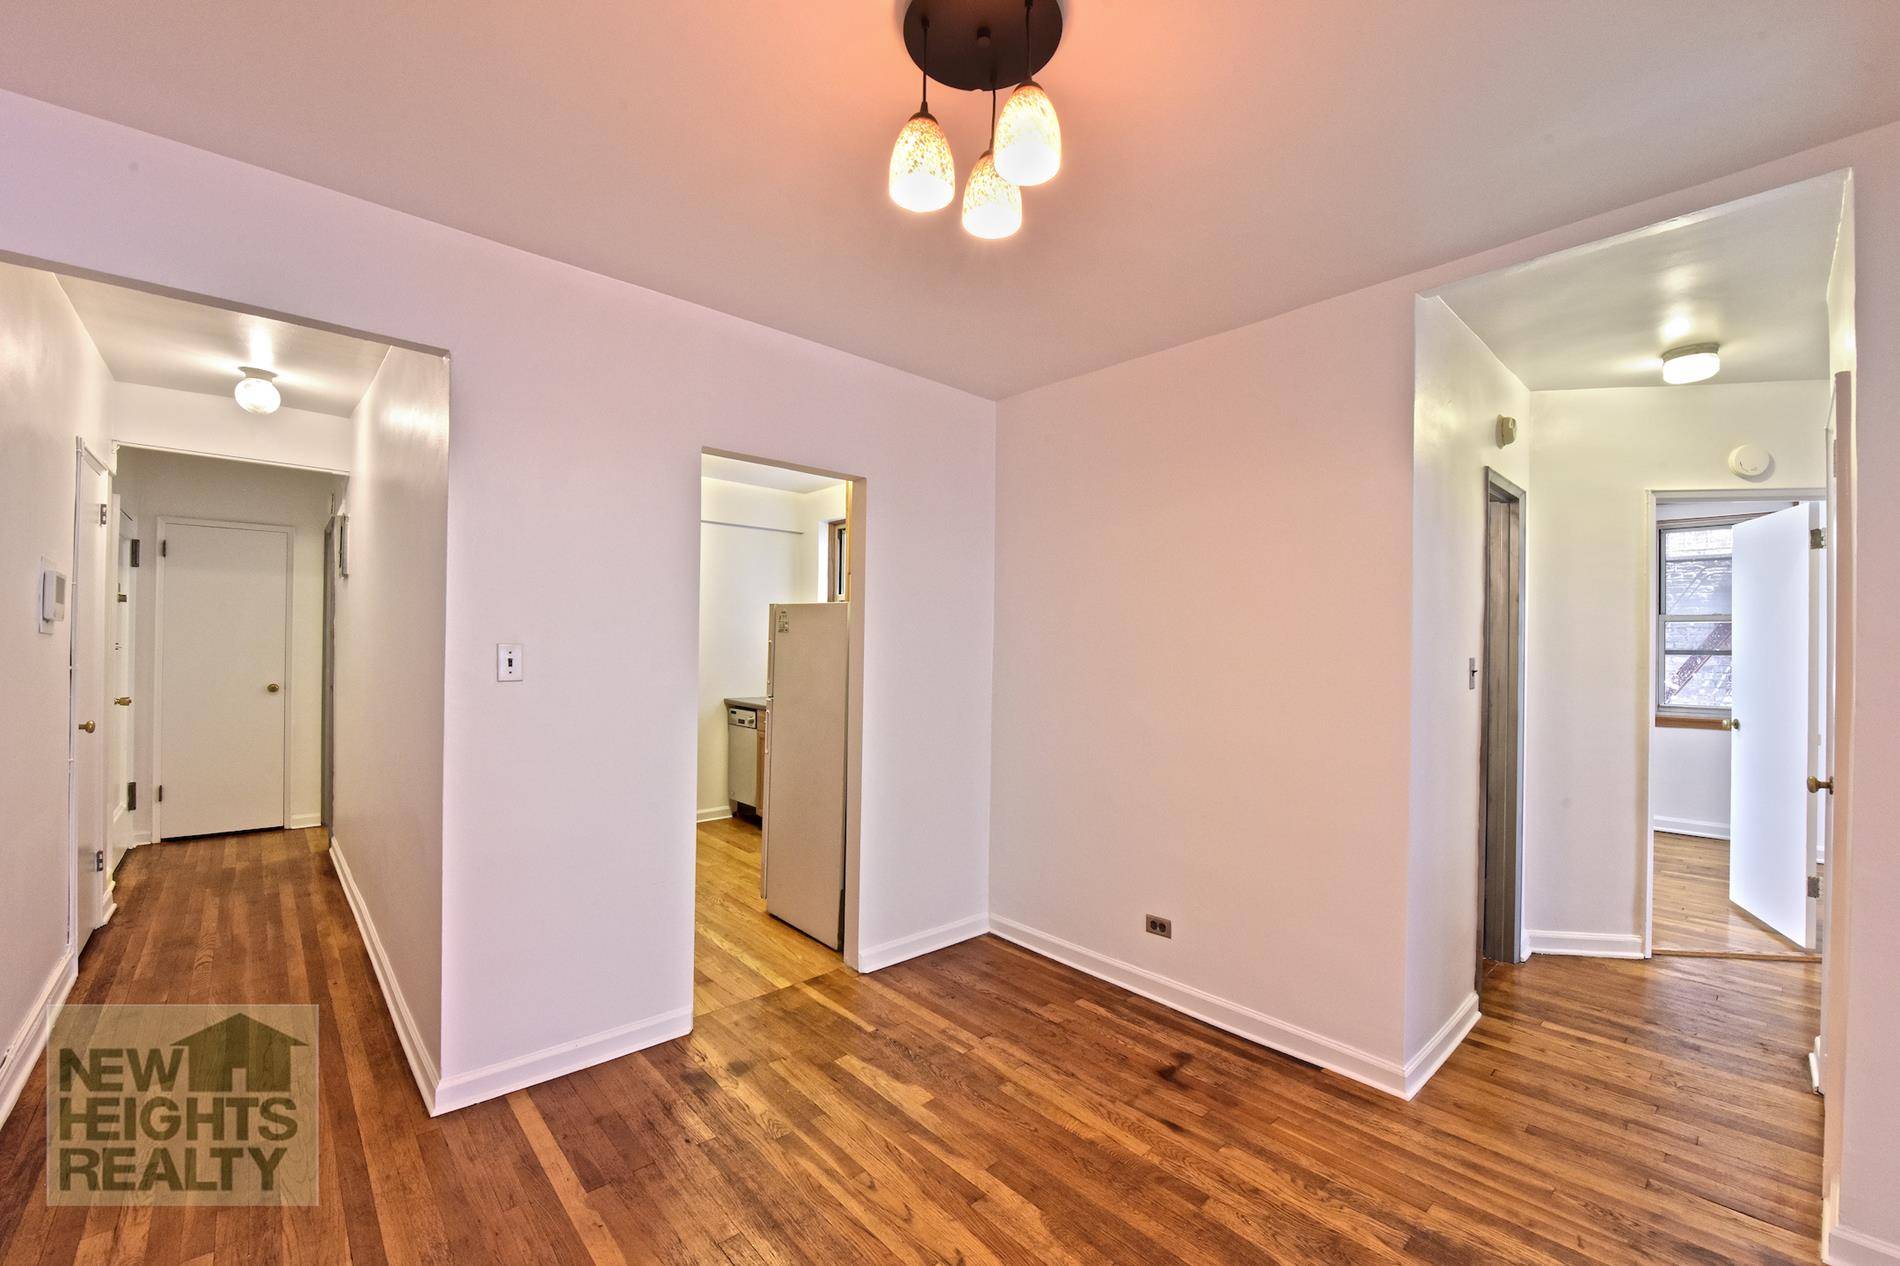 This very large two bedroom unit can easily be converted to a three bedroom apartment.